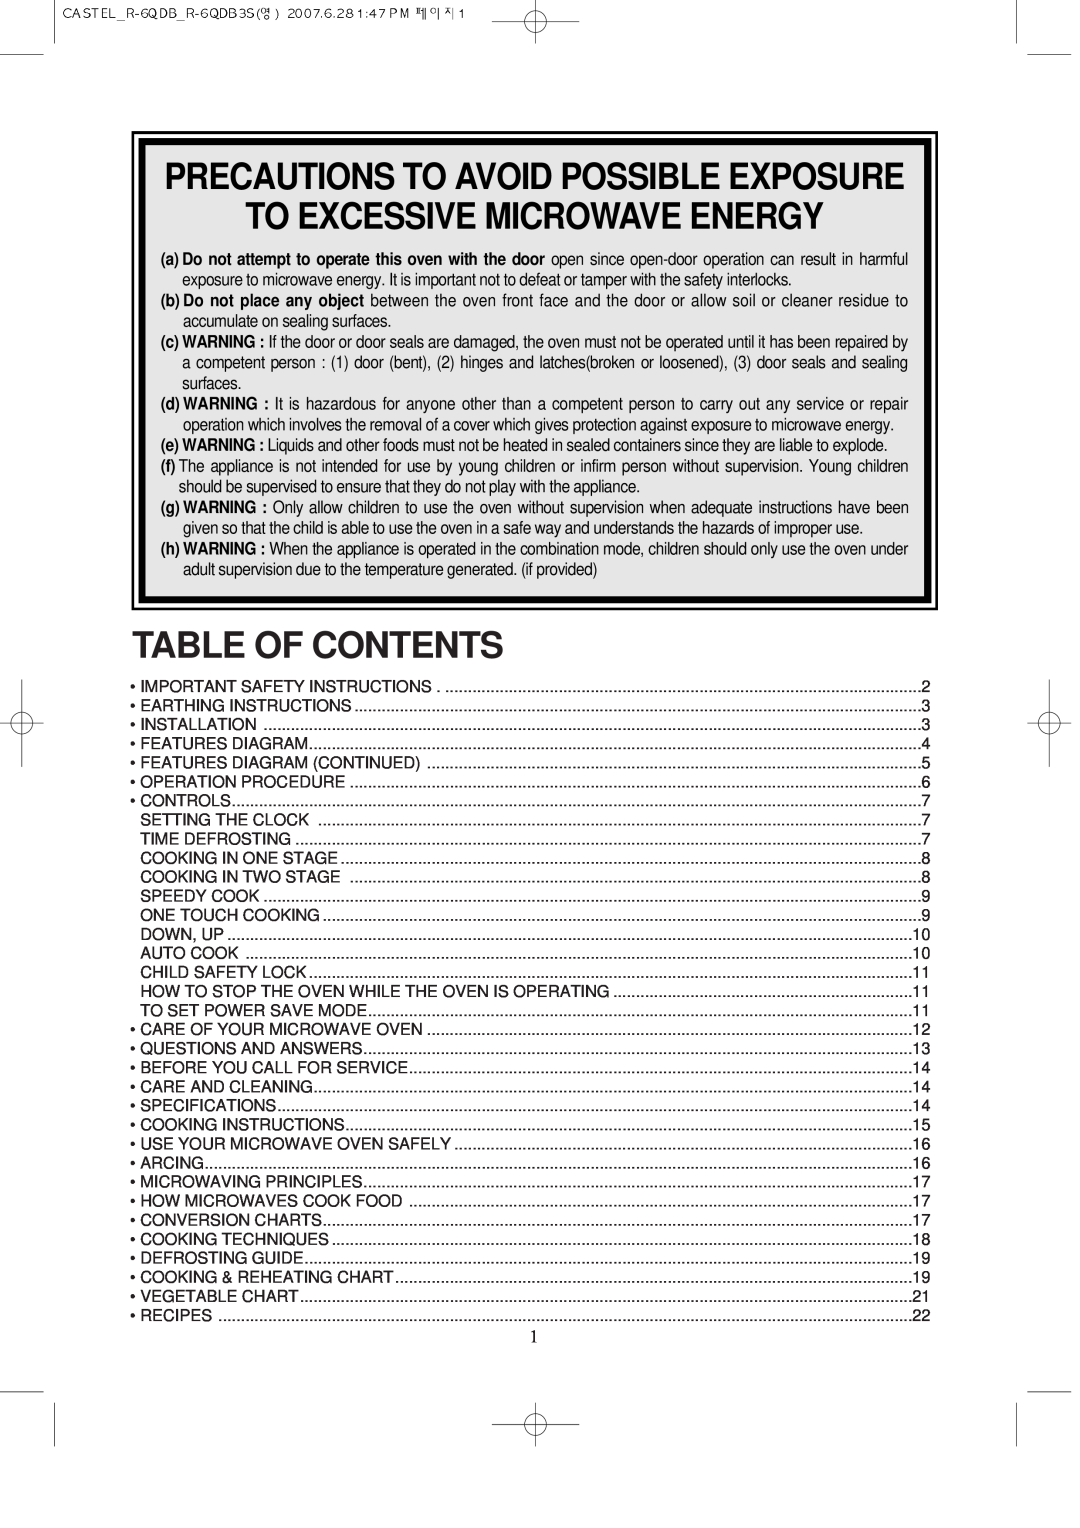 Daewoo KOR-6QDB manual Precautions To Avoid Possible Exposure To Excessive Microwave Energy, Table Of Contents 